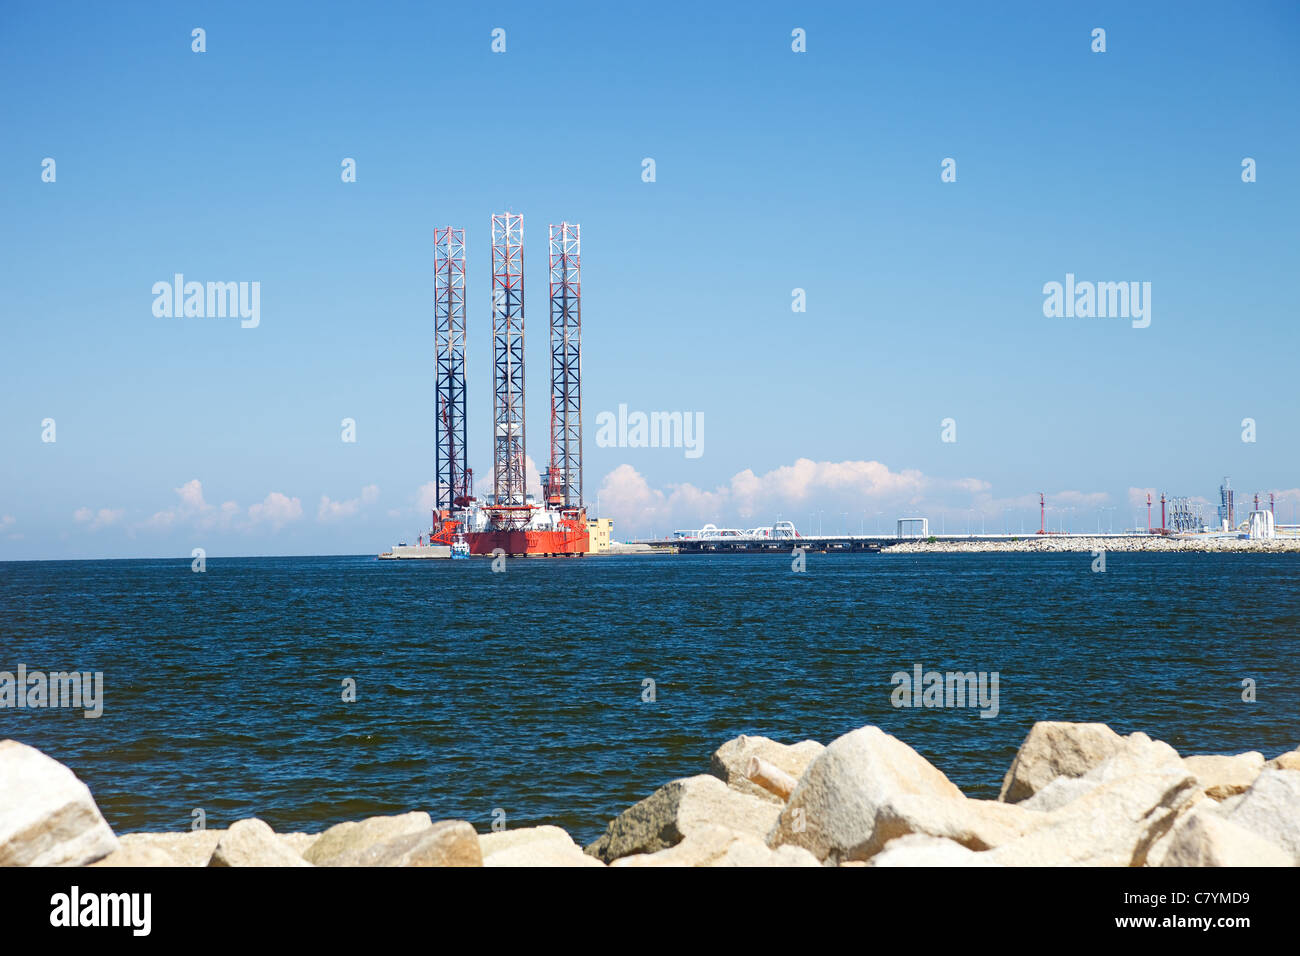 Offshore drilling on the background of blue sky. Stock Photo